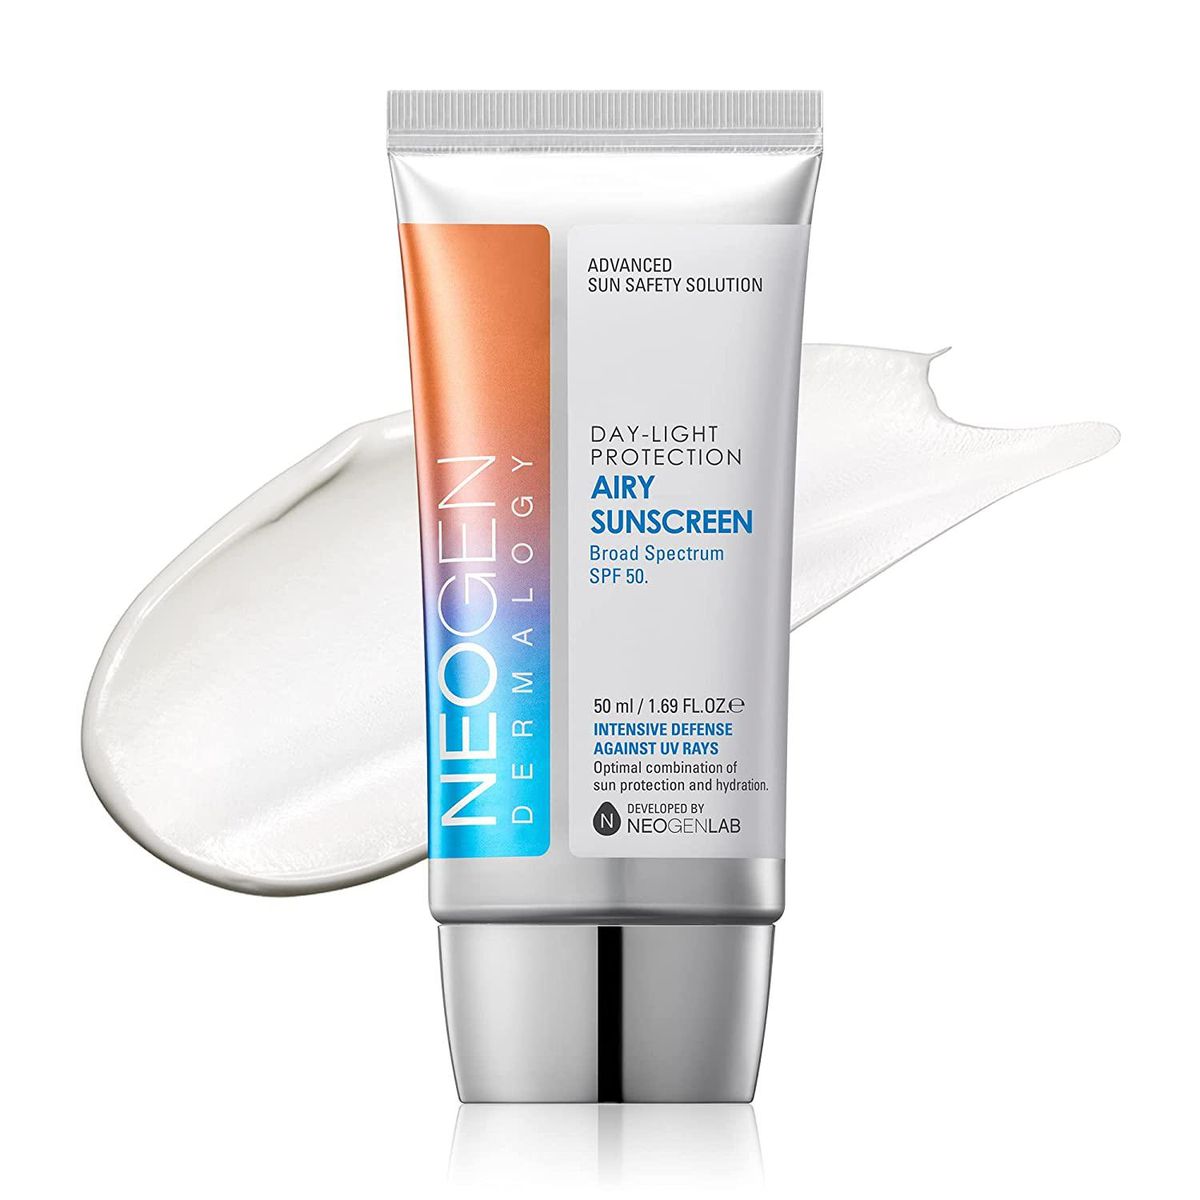 Day-light Protection Airy Sunscreen